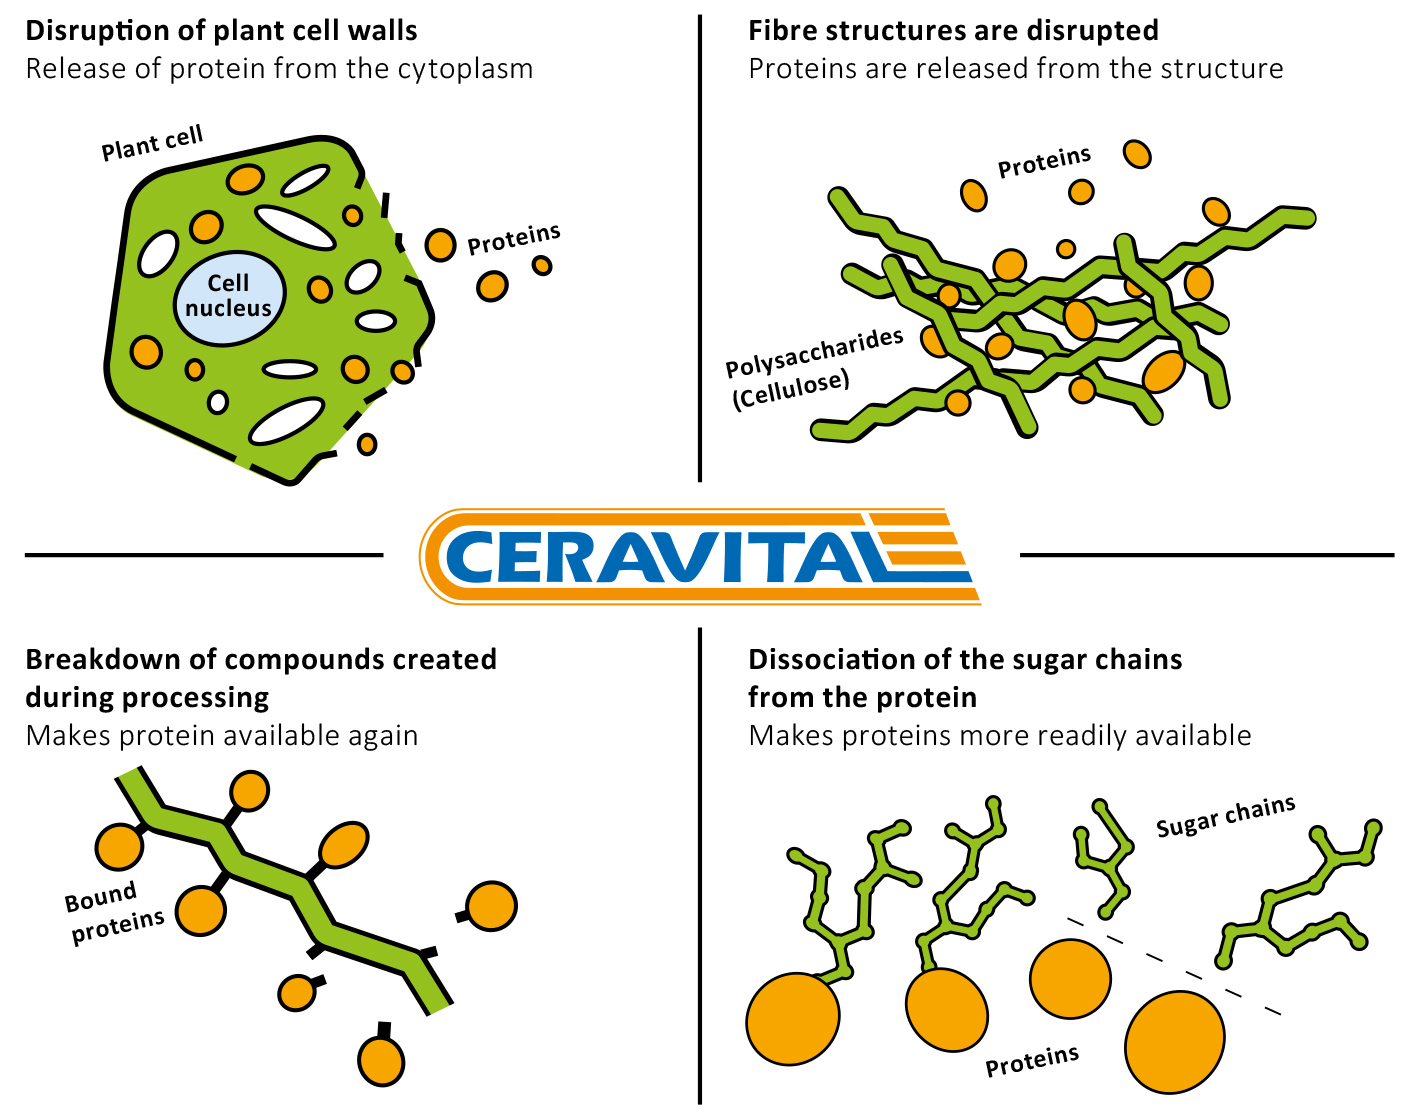 Effects of CERAVITAL XP